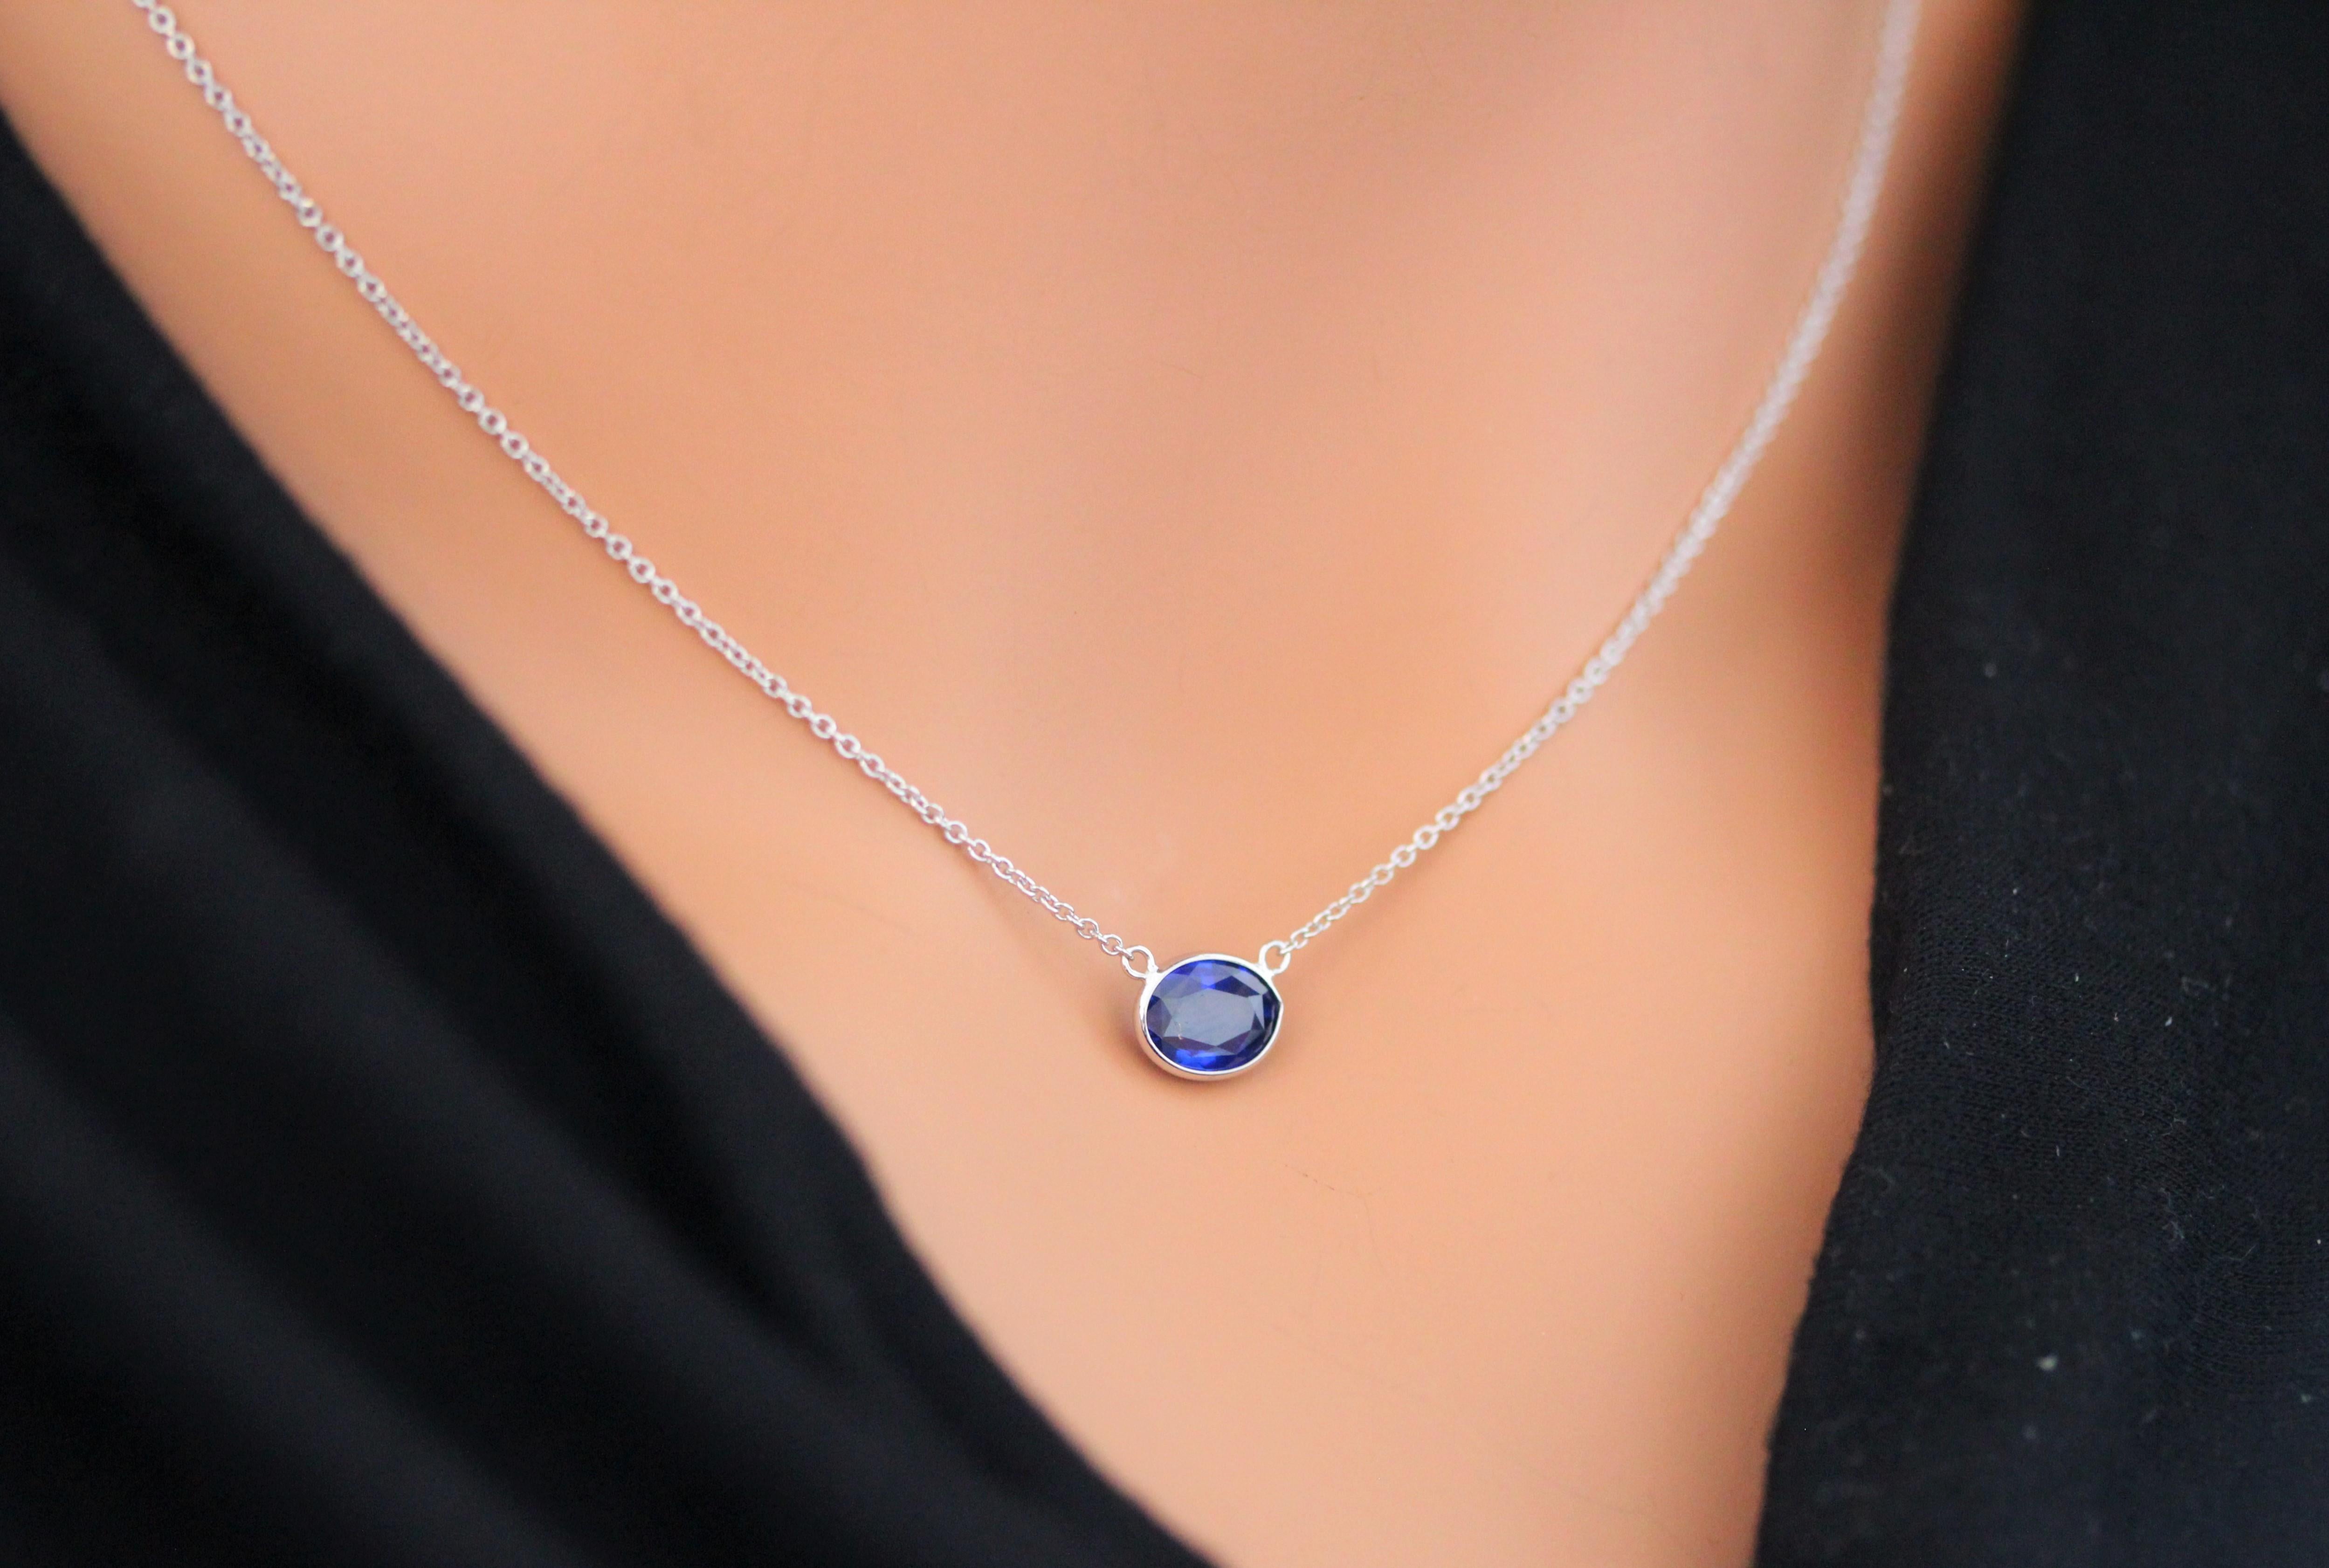 Oval Cut 1.83 Carat Oval Sapphire Blue Fashion Necklaces In 14k White Gold For Sale